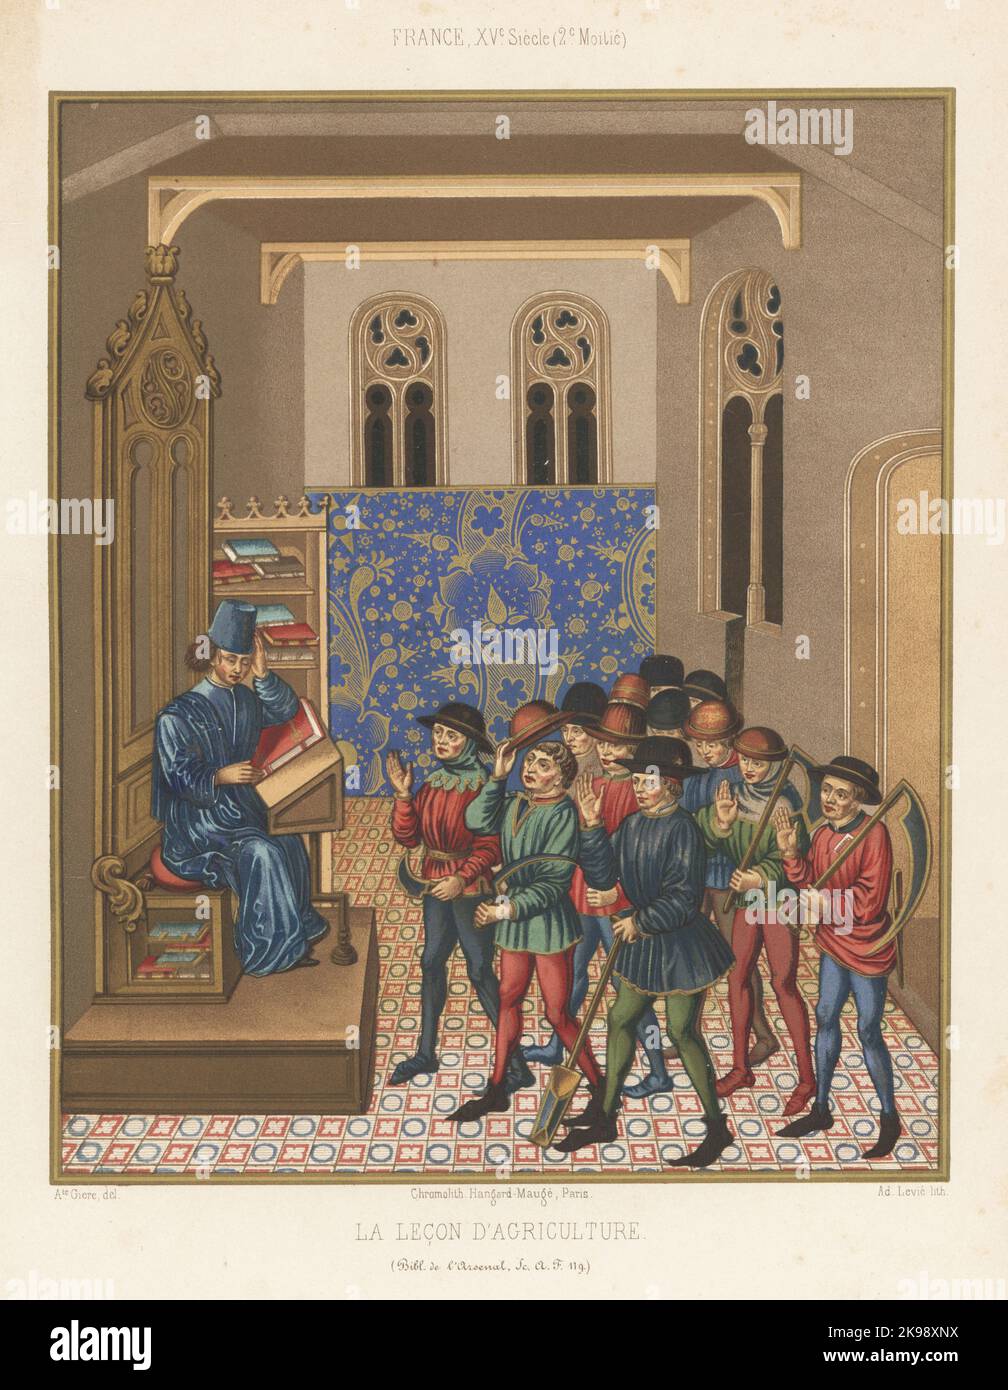 Pietro de Crescenzi lecturing on agriculture, 15th century. The audience of gardeners, loggers, harvesters, hold adzes, scythes, sickles. La Lecon d'Agriculture. France, XVe siecle. From Pierre de Crescens' manuscript Livre des profits chempetres, Sc. A. F. 119 (5064), Folio 1r, Bibliotheque de l'Arsenal. Chromolithograph by Ad. Levie after an illustration by A. Giere from Charles Louandre’s Les Arts Somptuaires, The Sumptuary Arts, Hangard-Mauge, Paris, 1858. Stock Photo